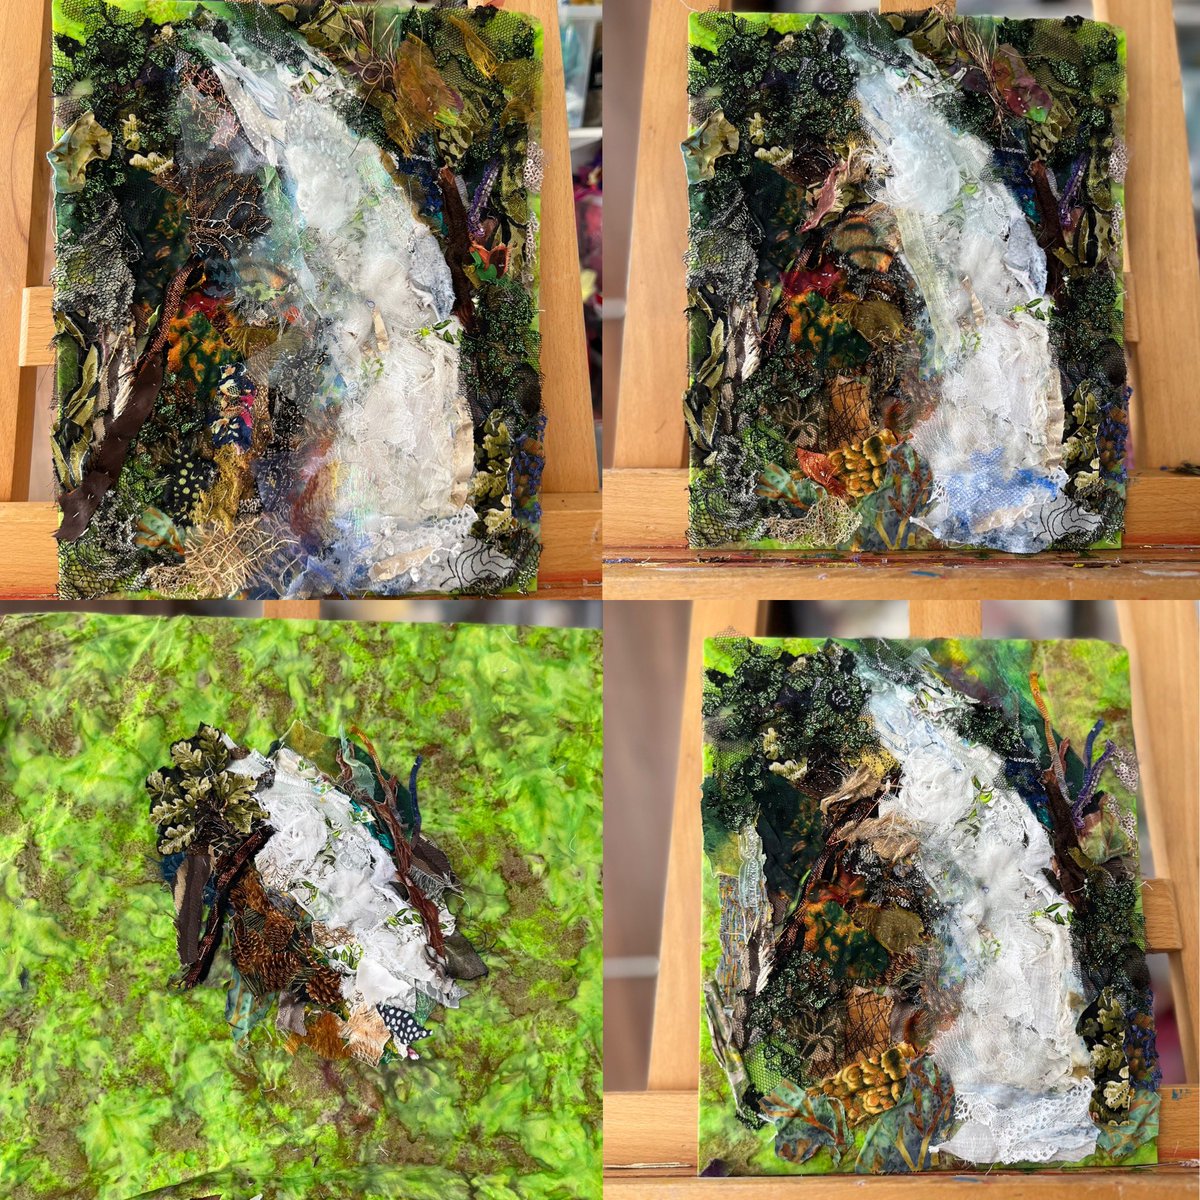 Here are the stages of development of the #waterfall with the finished image top left! #textiles #textileart